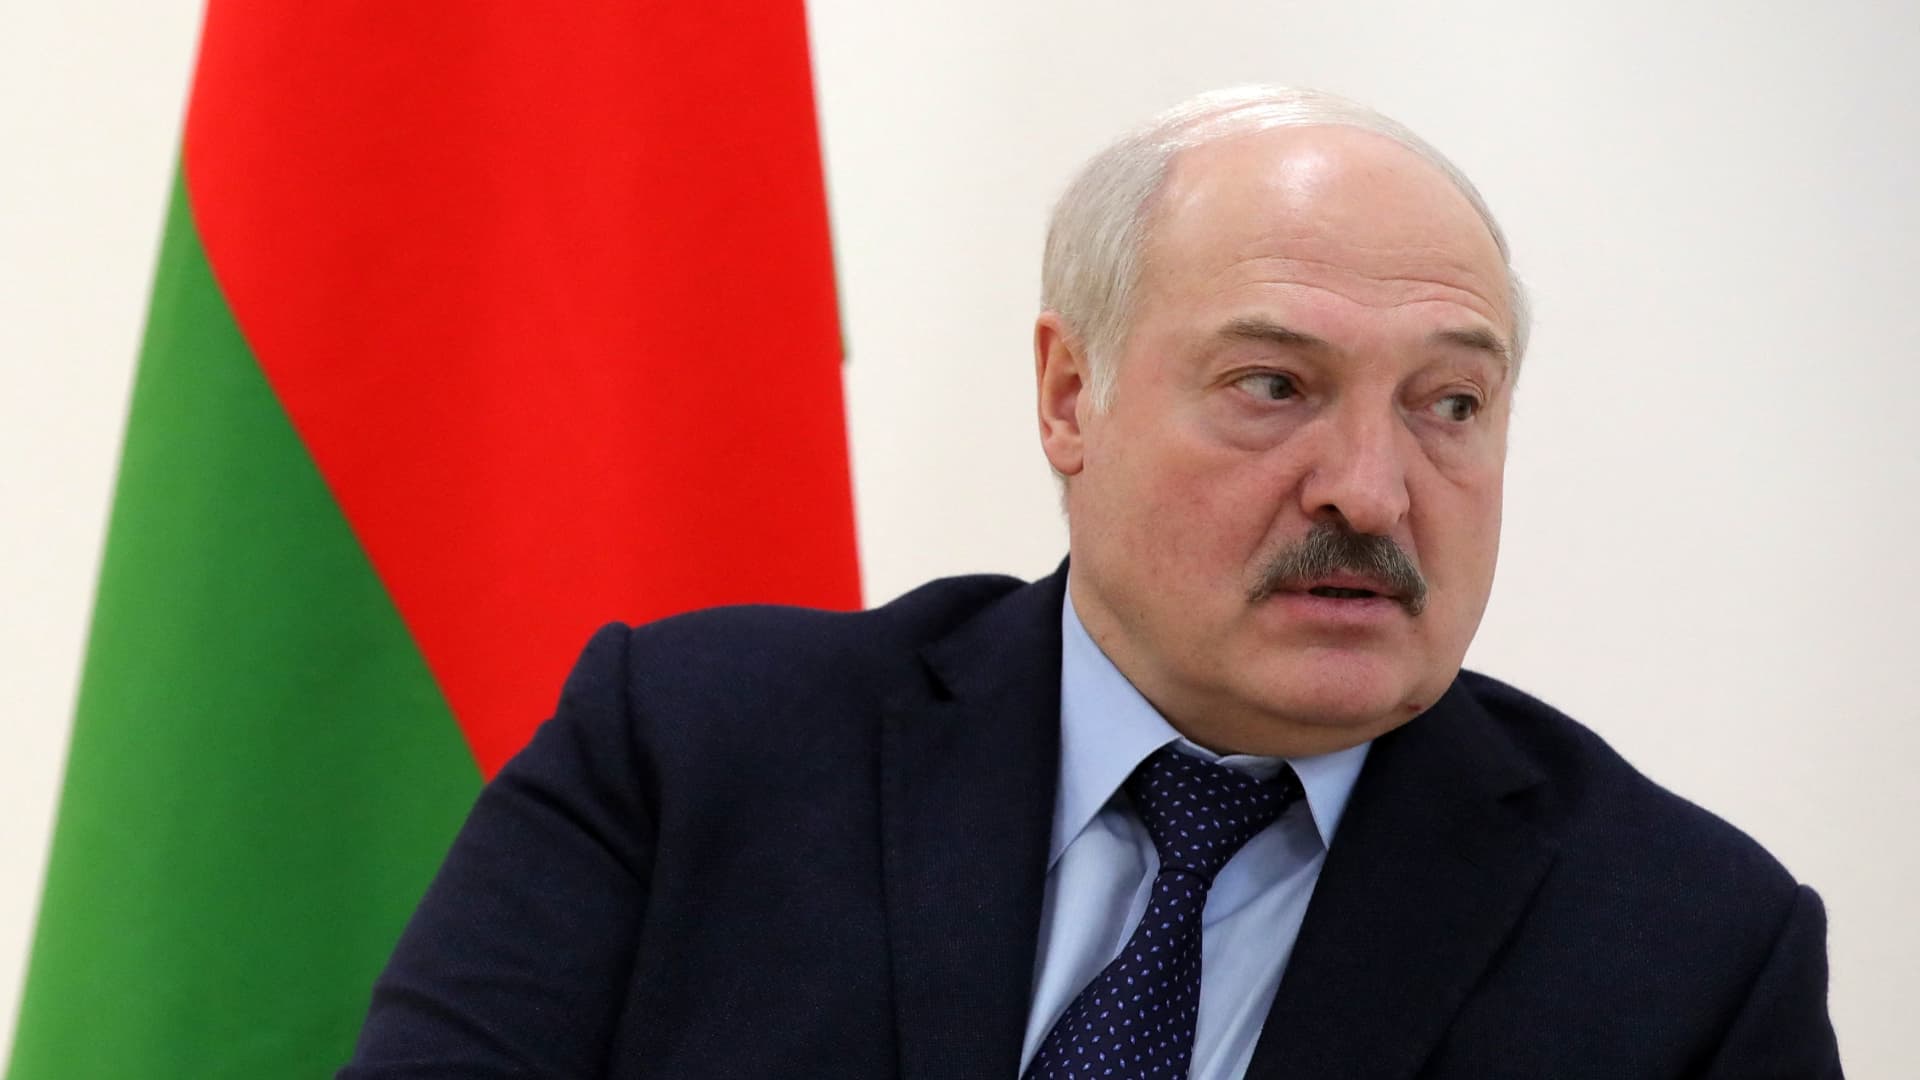 Lukashenko reportedly says Belarus intercepted attempted missile strikes by Ukraine